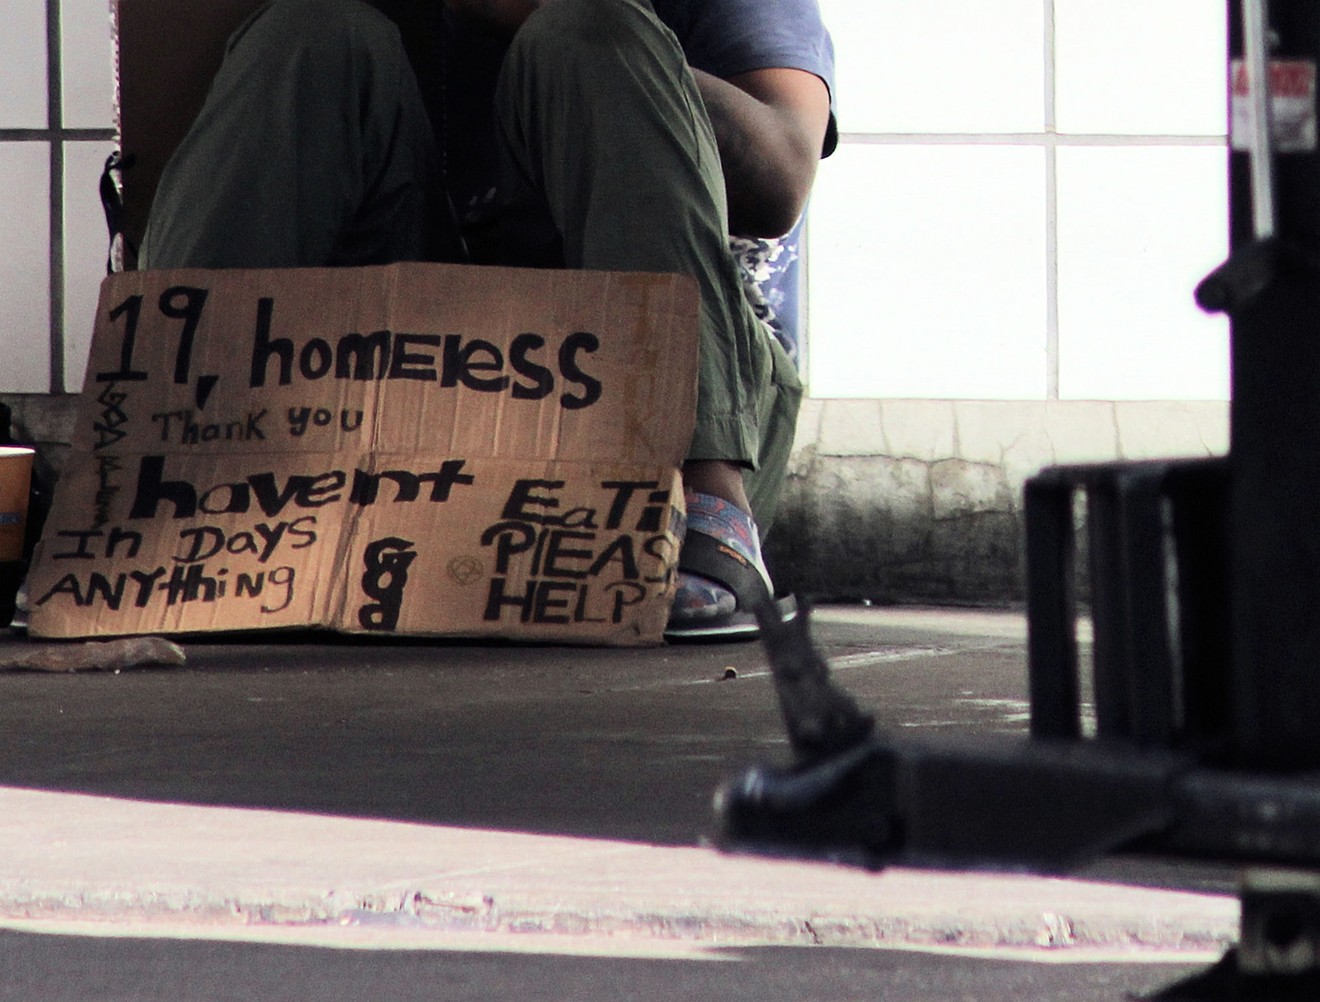 Family instability, more than financial issues, is driving youth homelessness in the Dallas area, a survey suggests.